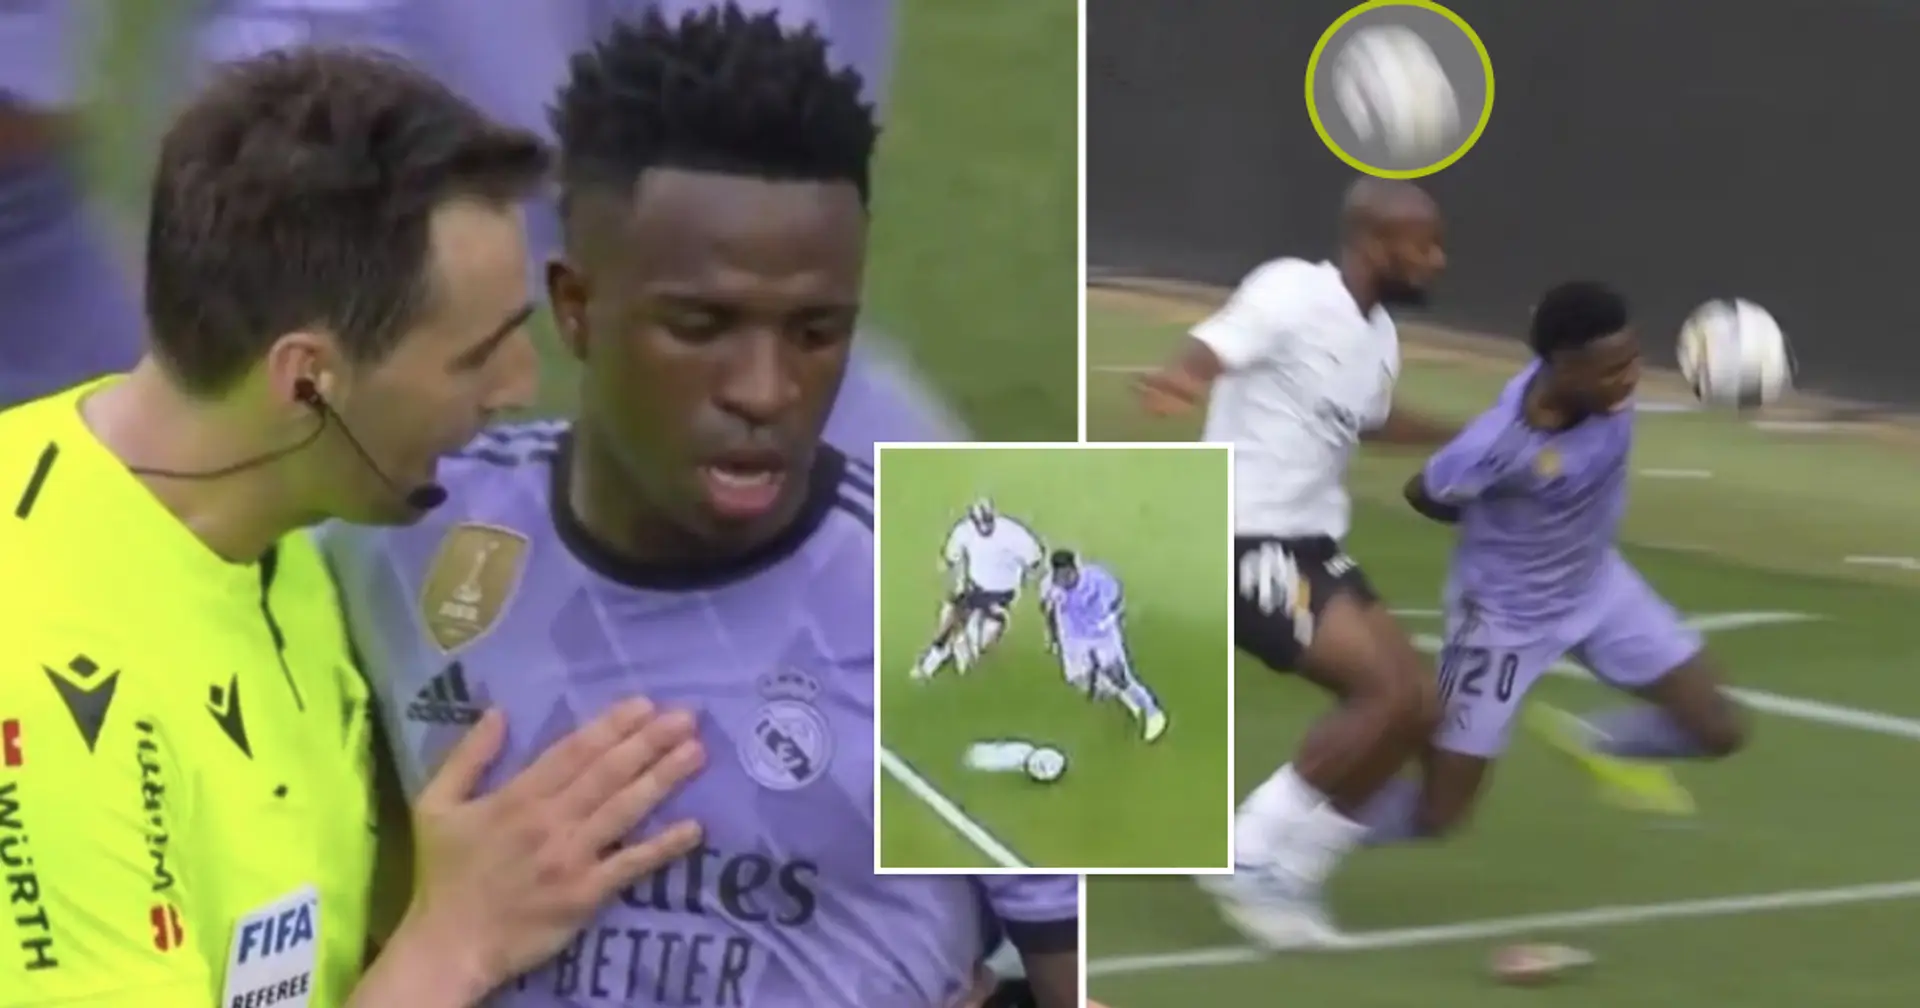 Spotted: Valencia player deliberately kicks second ball to knock Vinicius over -- only sees a yellow